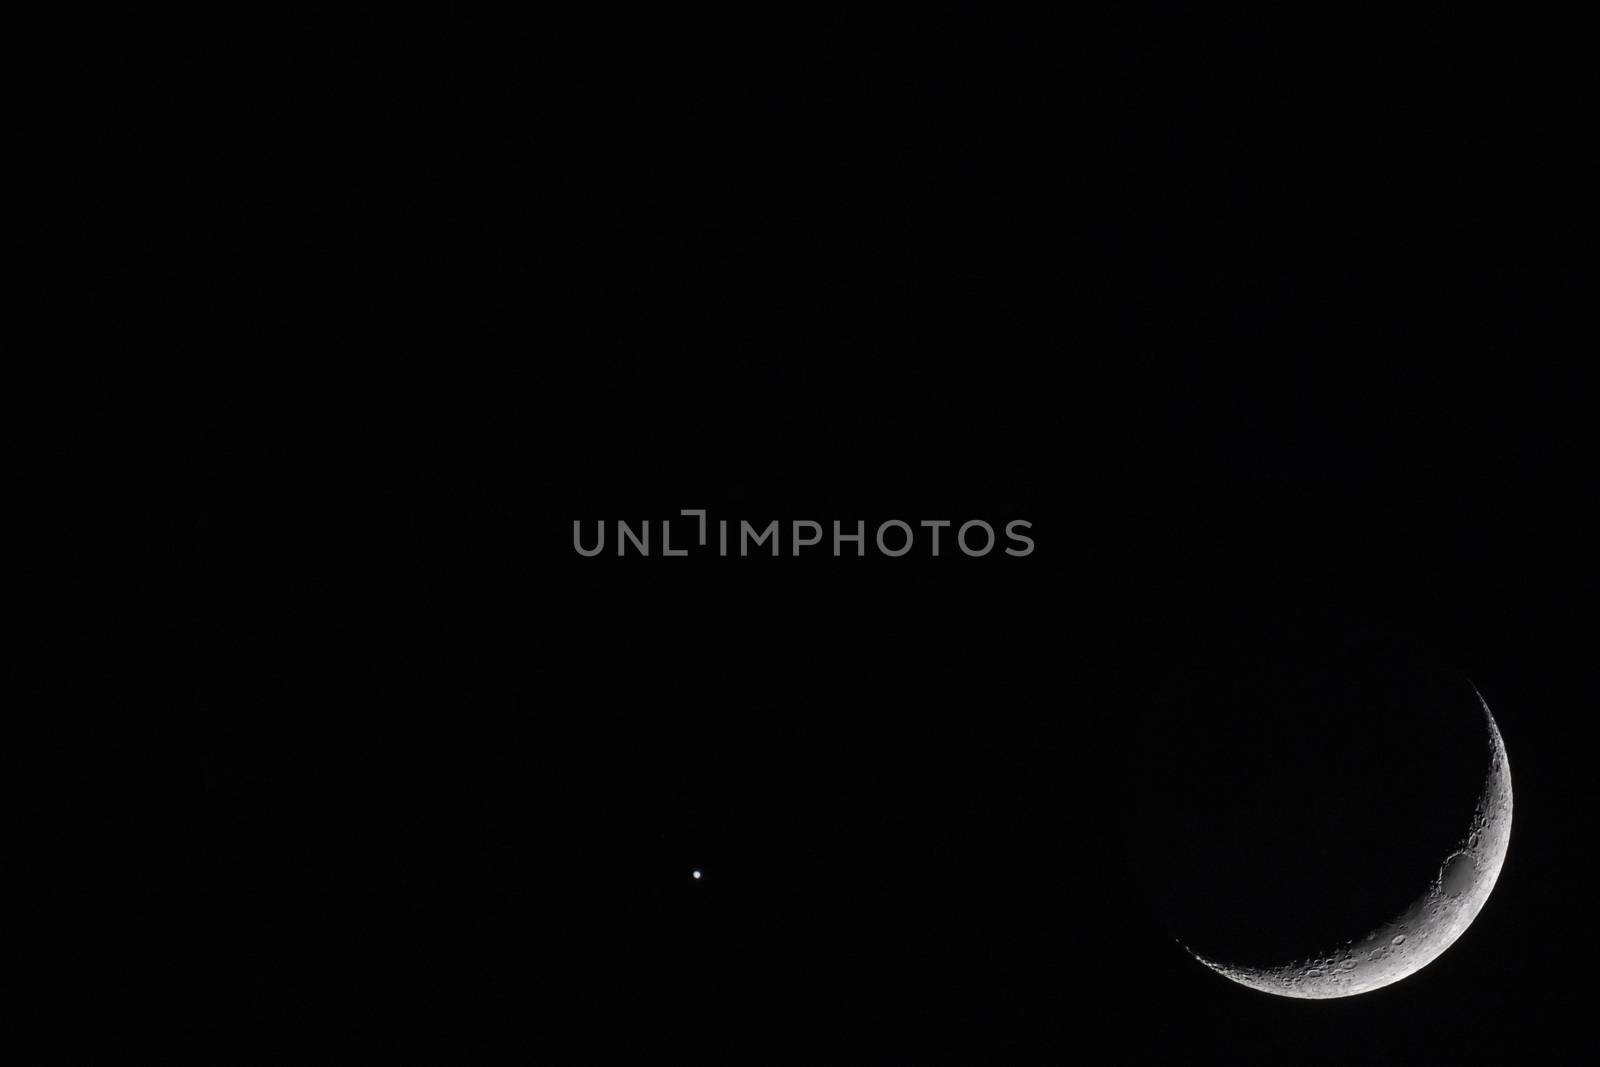 Crescent Moon with bright star against black sky at night with large copy space